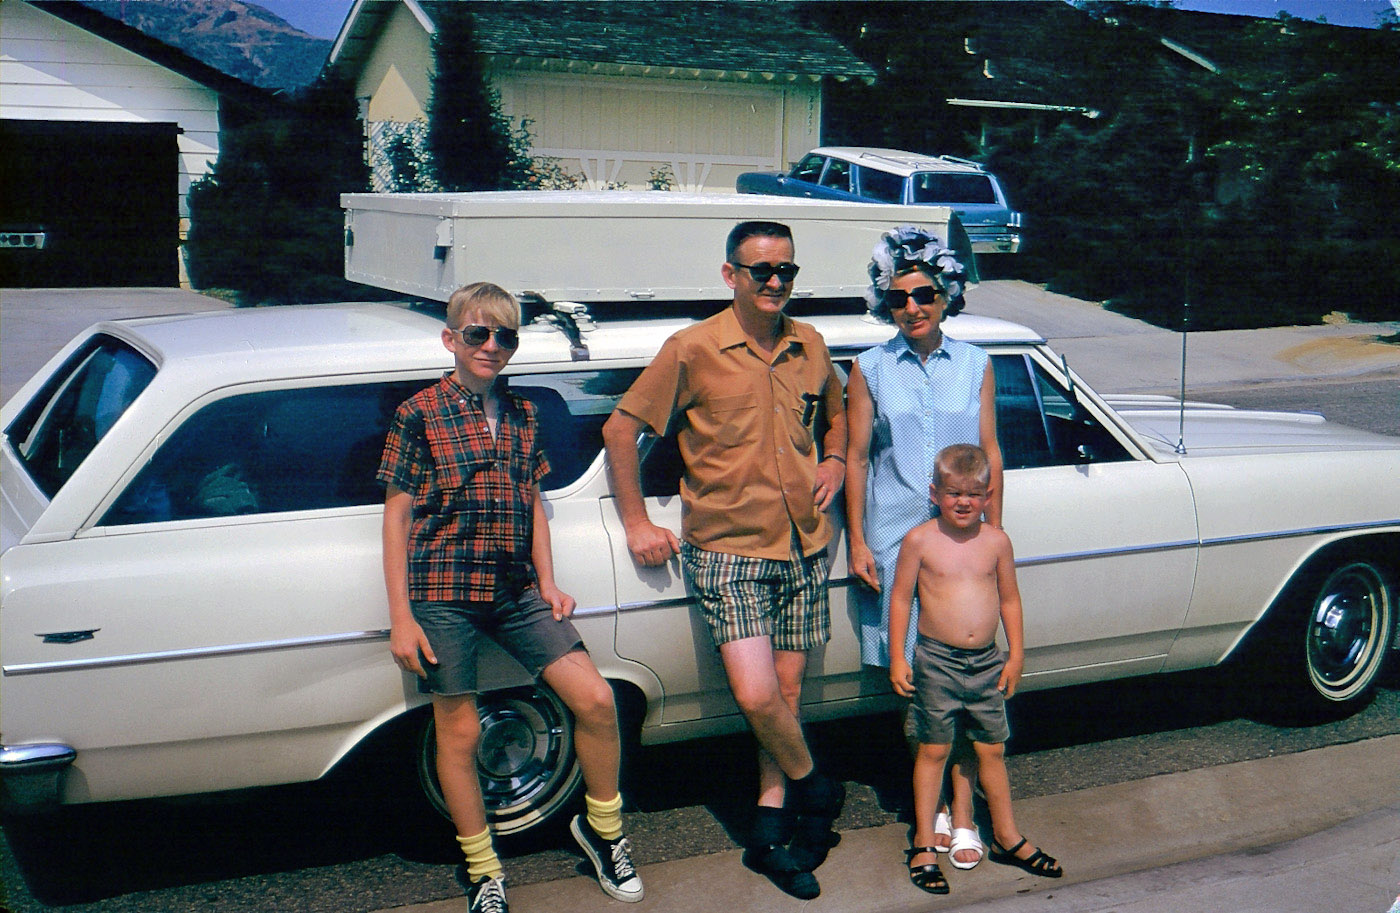 Leaving Walnut, CA for Wyoming and Nebraska in July 1969. I'm on the left, trying to look cool, going to start high school in the fall. Yikes, those socks!

There's my Dad and Mom, who appeared in earlier pictures. They're showing some age progression. Both are in their early 40s here. My little brother was a surly bundle of anti-joy then, and he whined a lot through the whole trip.

We packed up the '64 Chevelle wagon and left for the great unknown. As a surly teen, I read a lot of books along the way and grunted and moaned a lot. During the trip, we heard about the Charles Manson family murders in Los Angeles, and being only 30 or so miles away, I was really scared to come home.

It all worked out ... thanks for looking and I look forward to your comments. View full size.